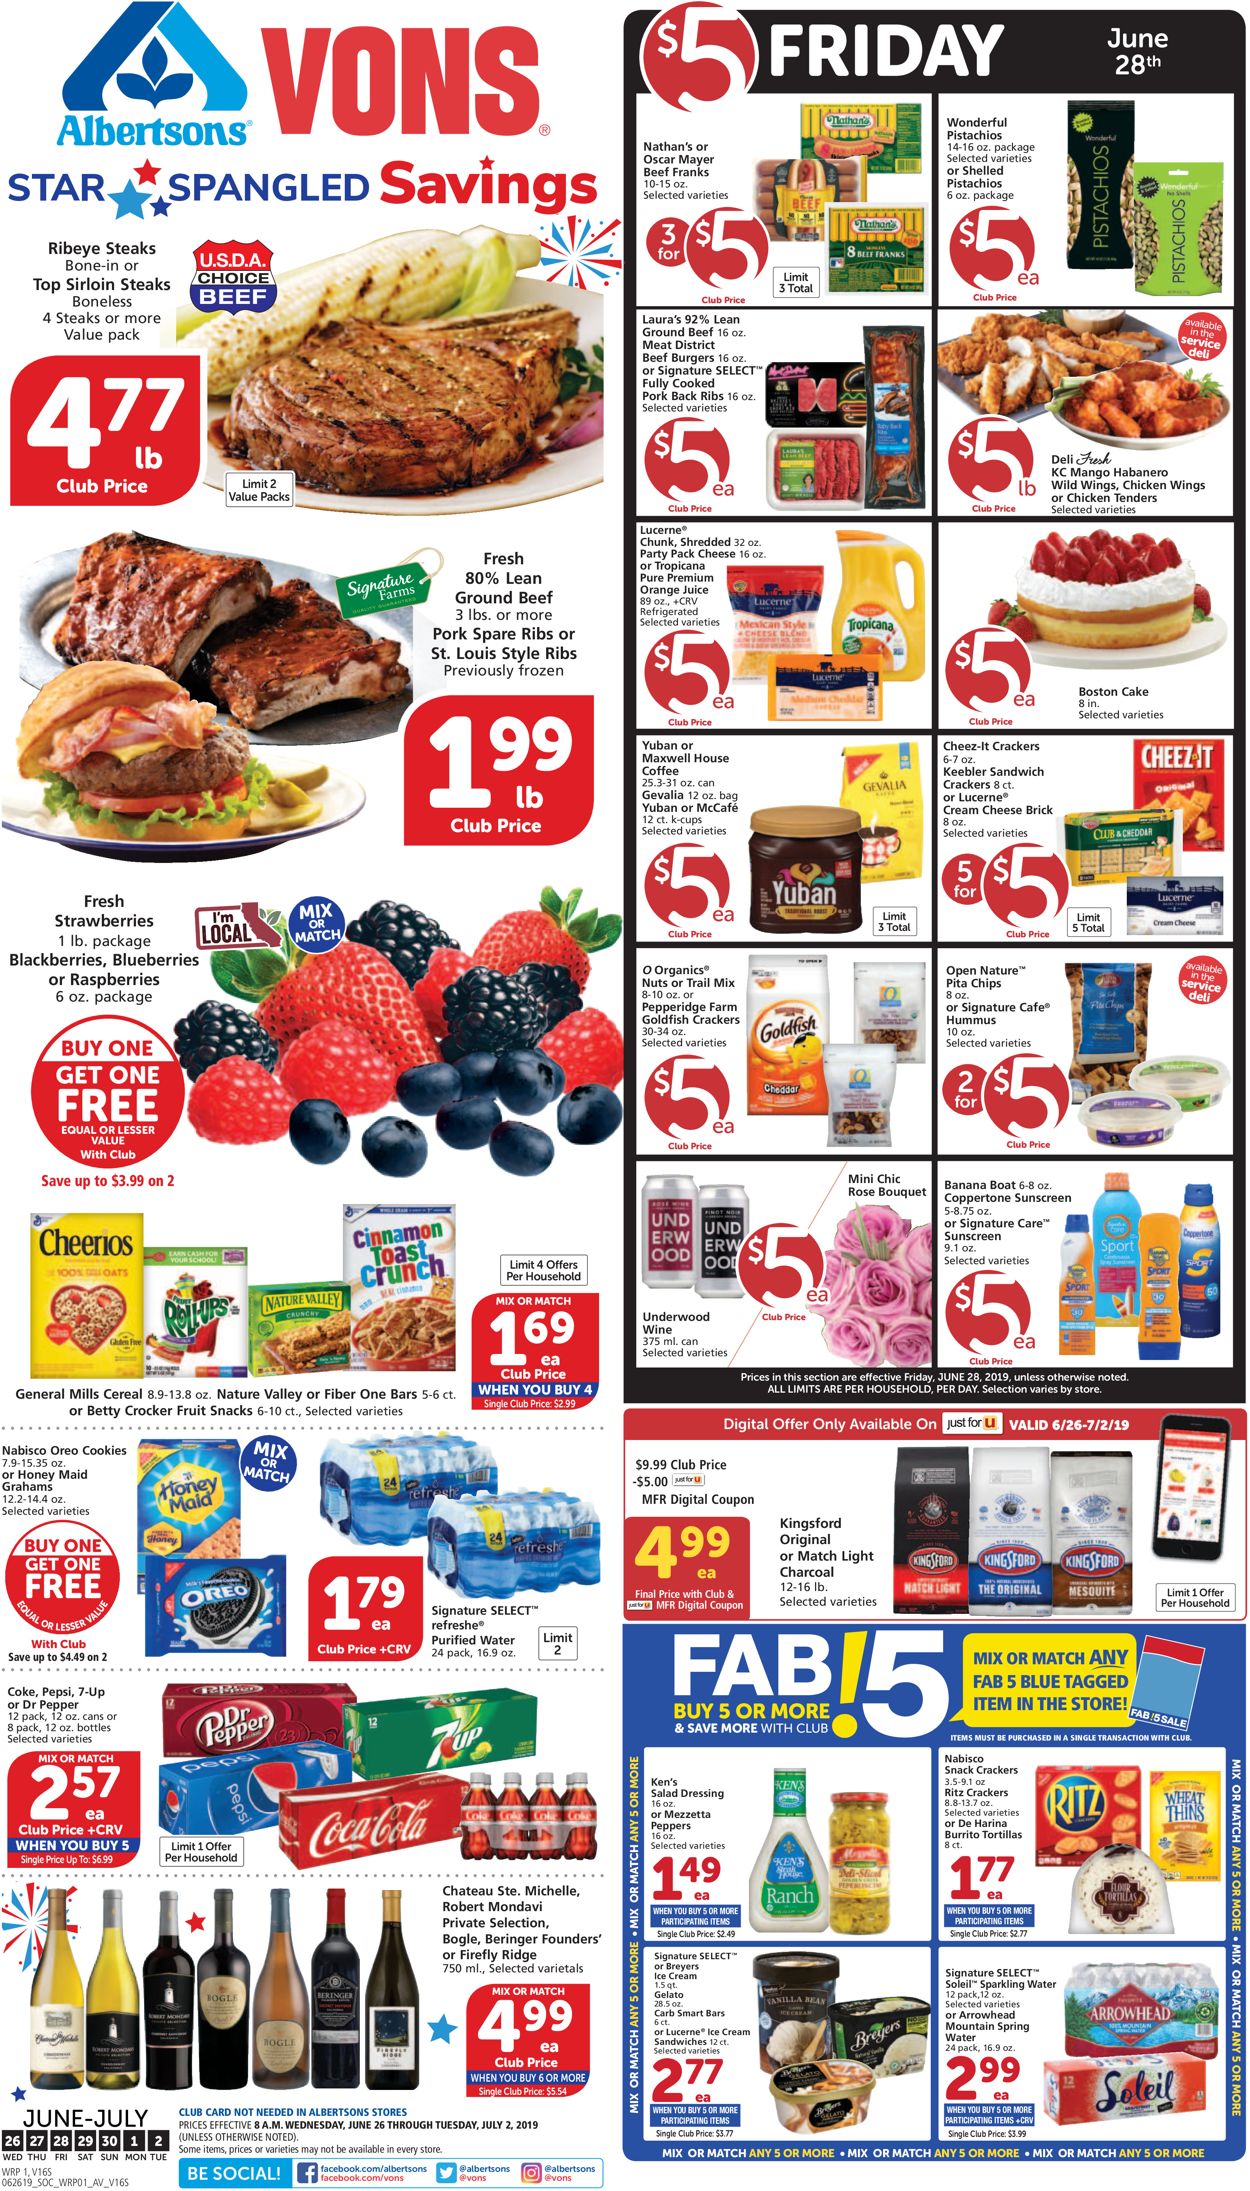 Vons Current weekly ad 06/26 - 07/02/2019 - frequent-ads.com